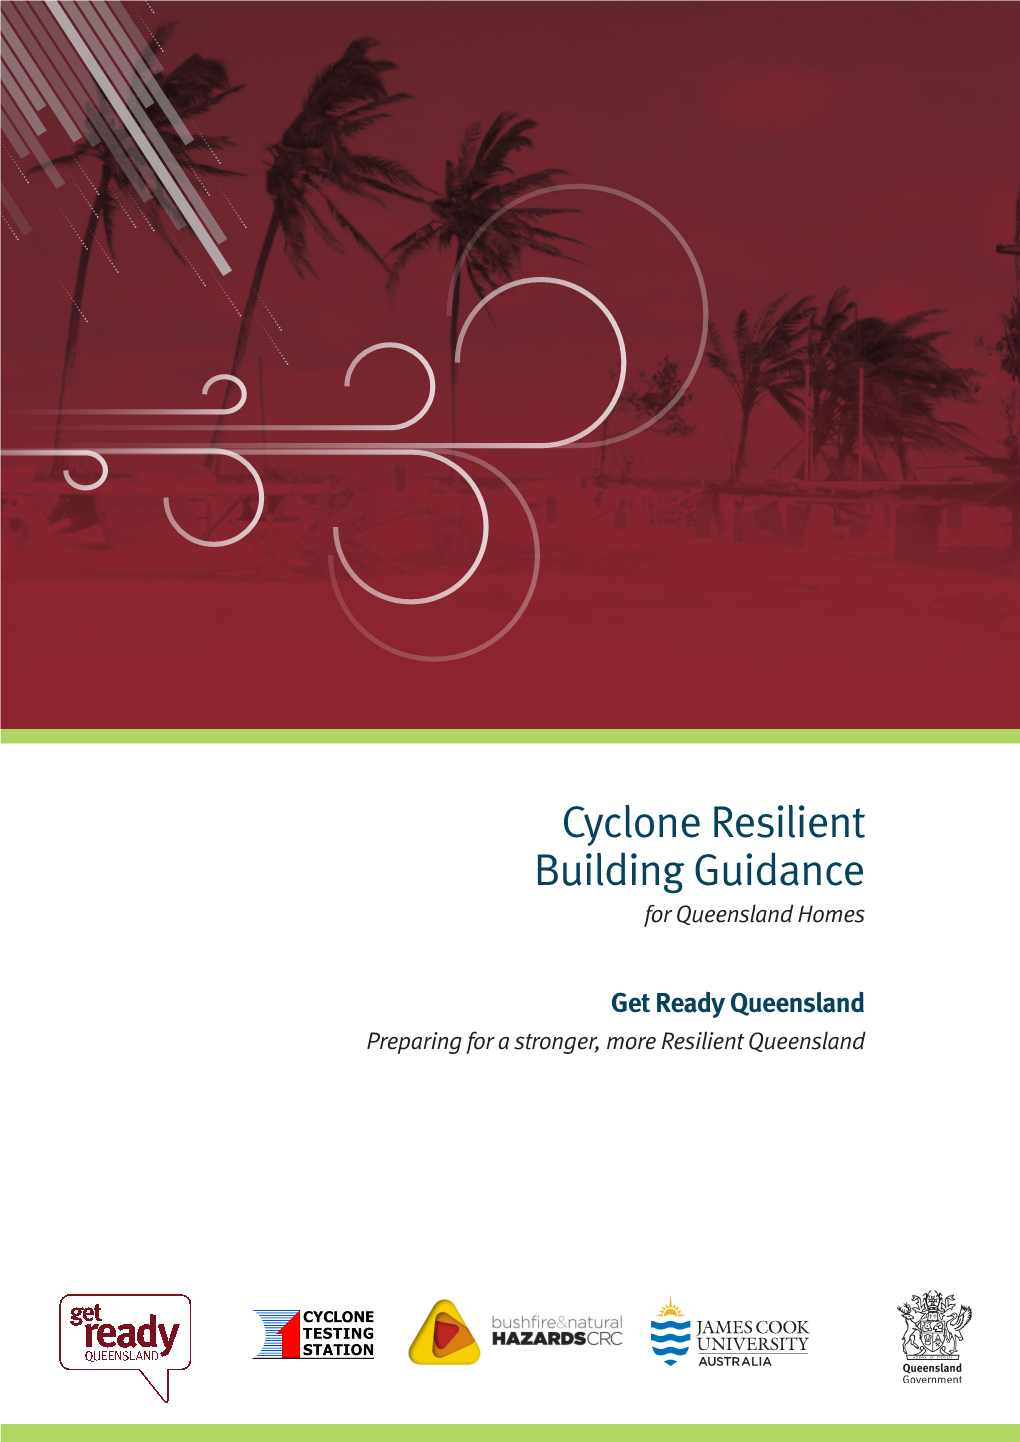 Cyclone Resilient Building Guidance for Queensland Homes